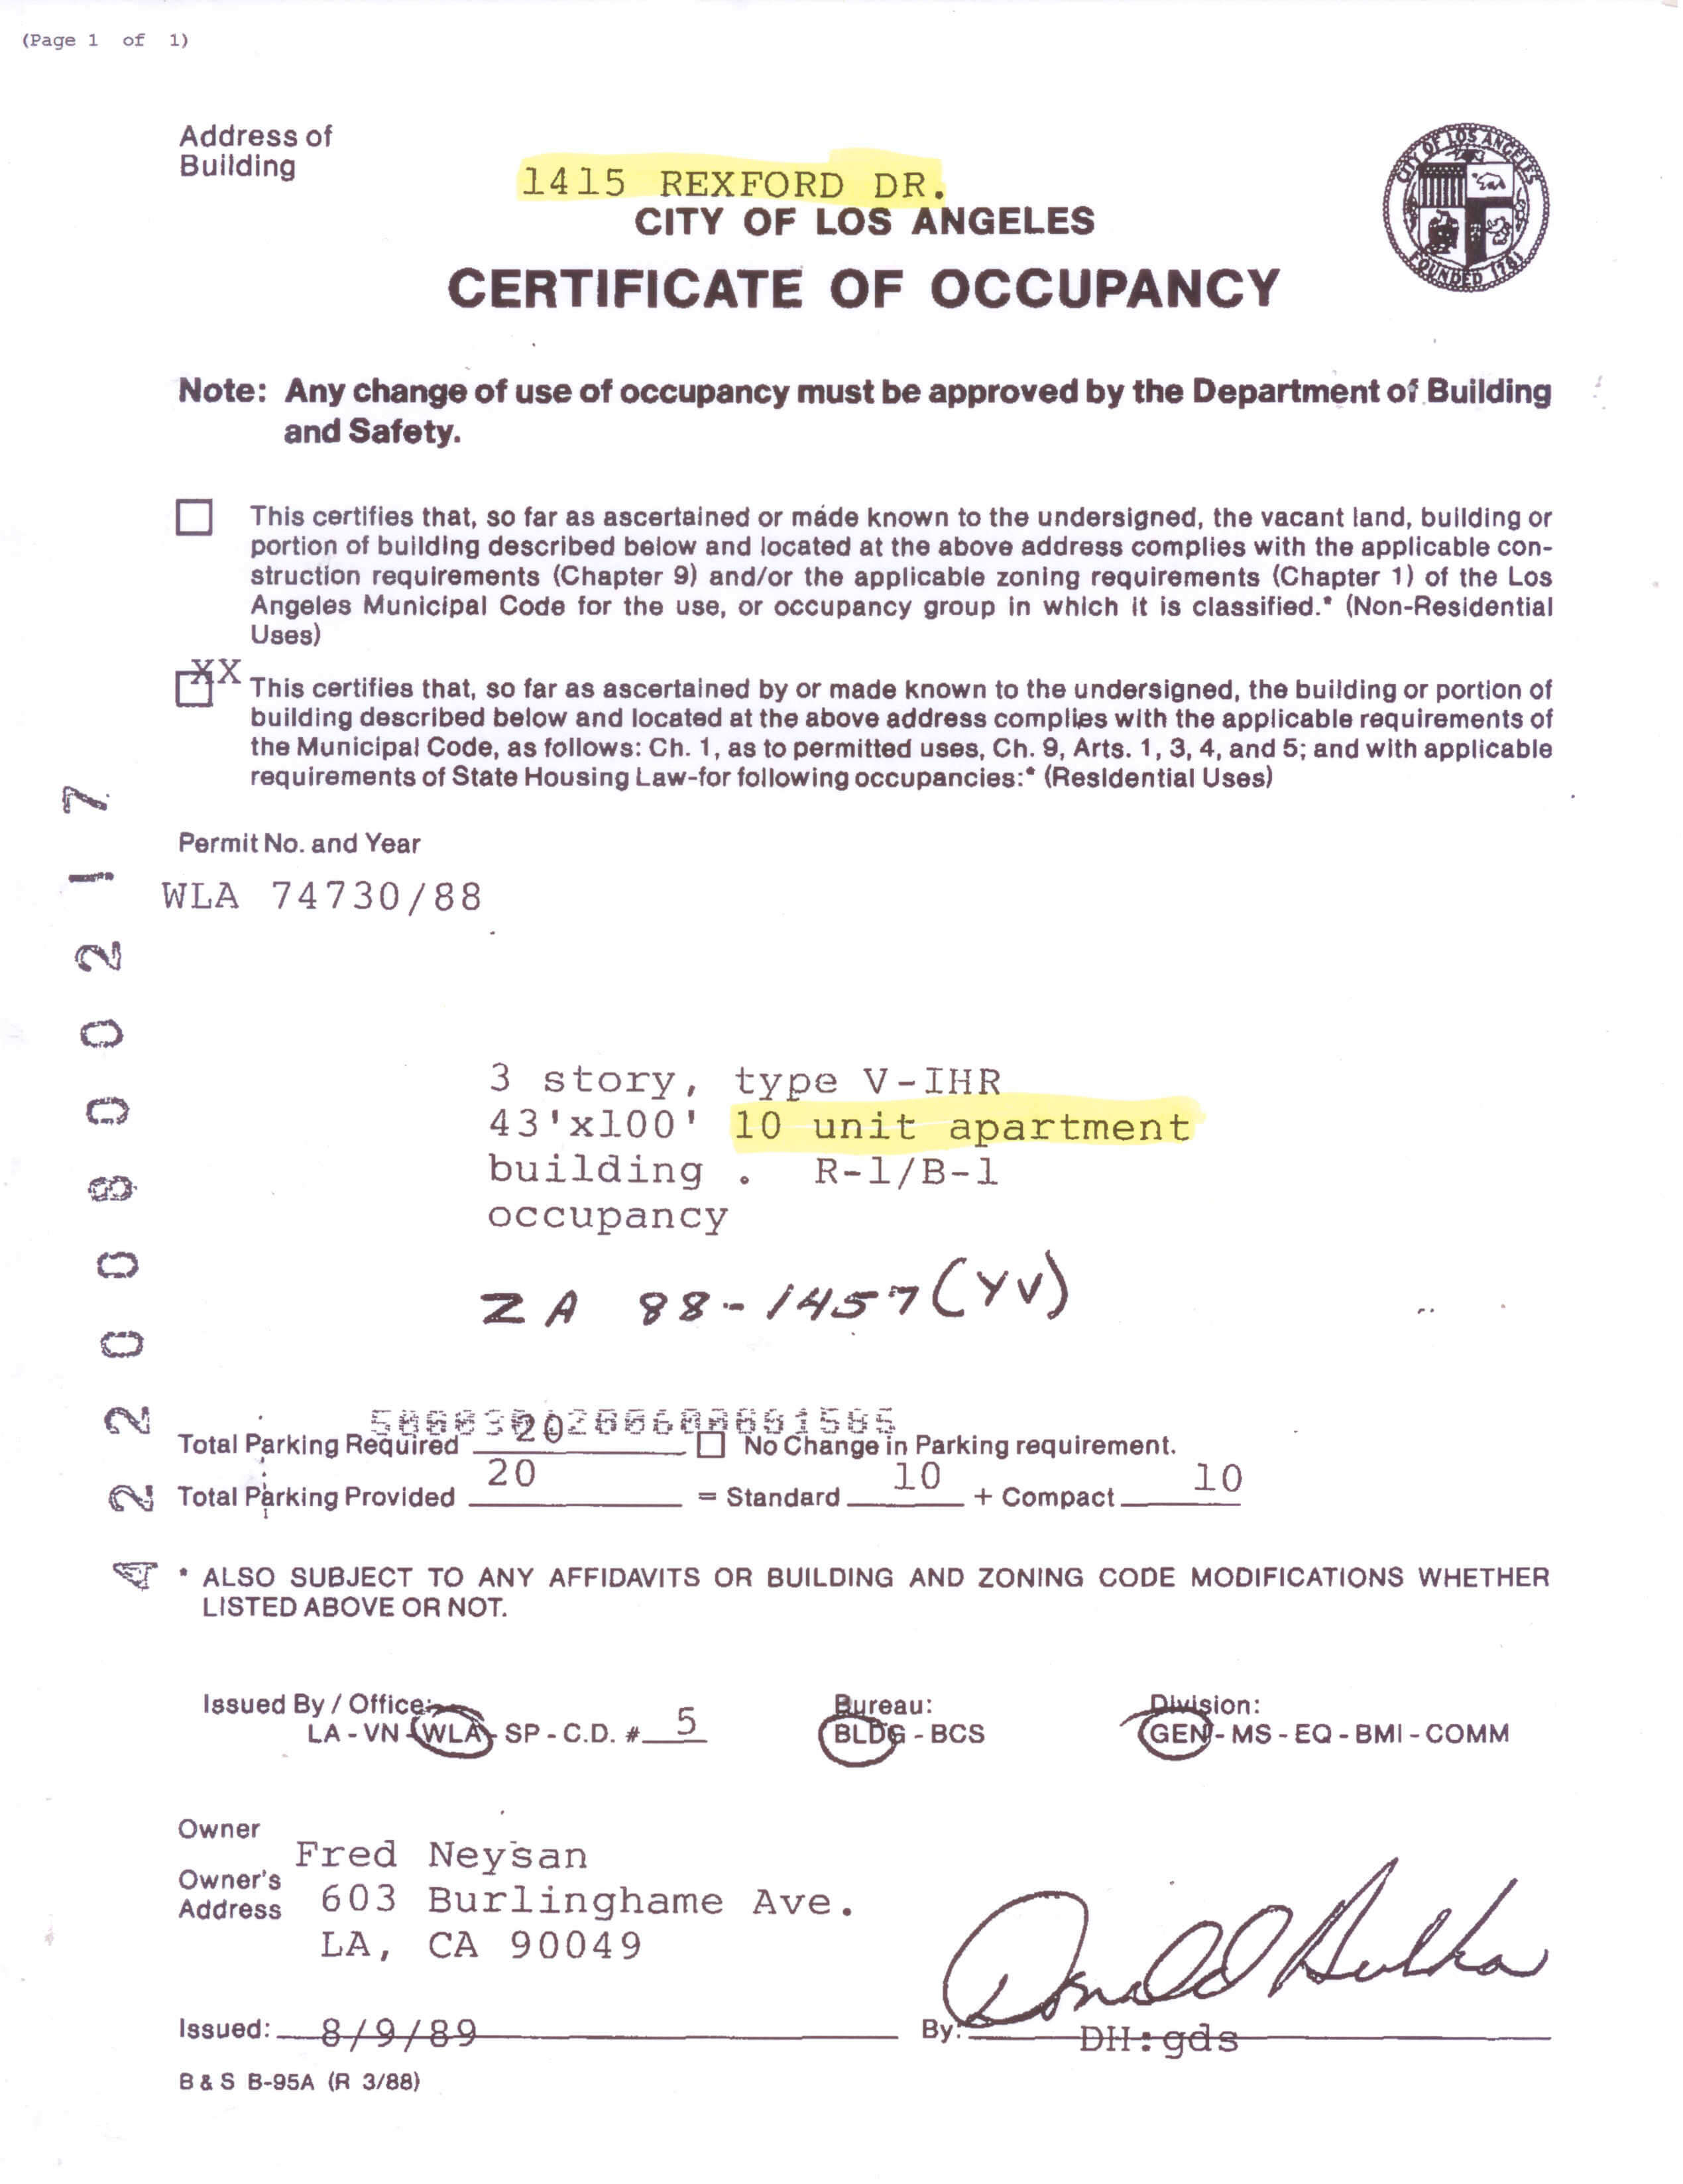 Certificate of occupancy for rentals